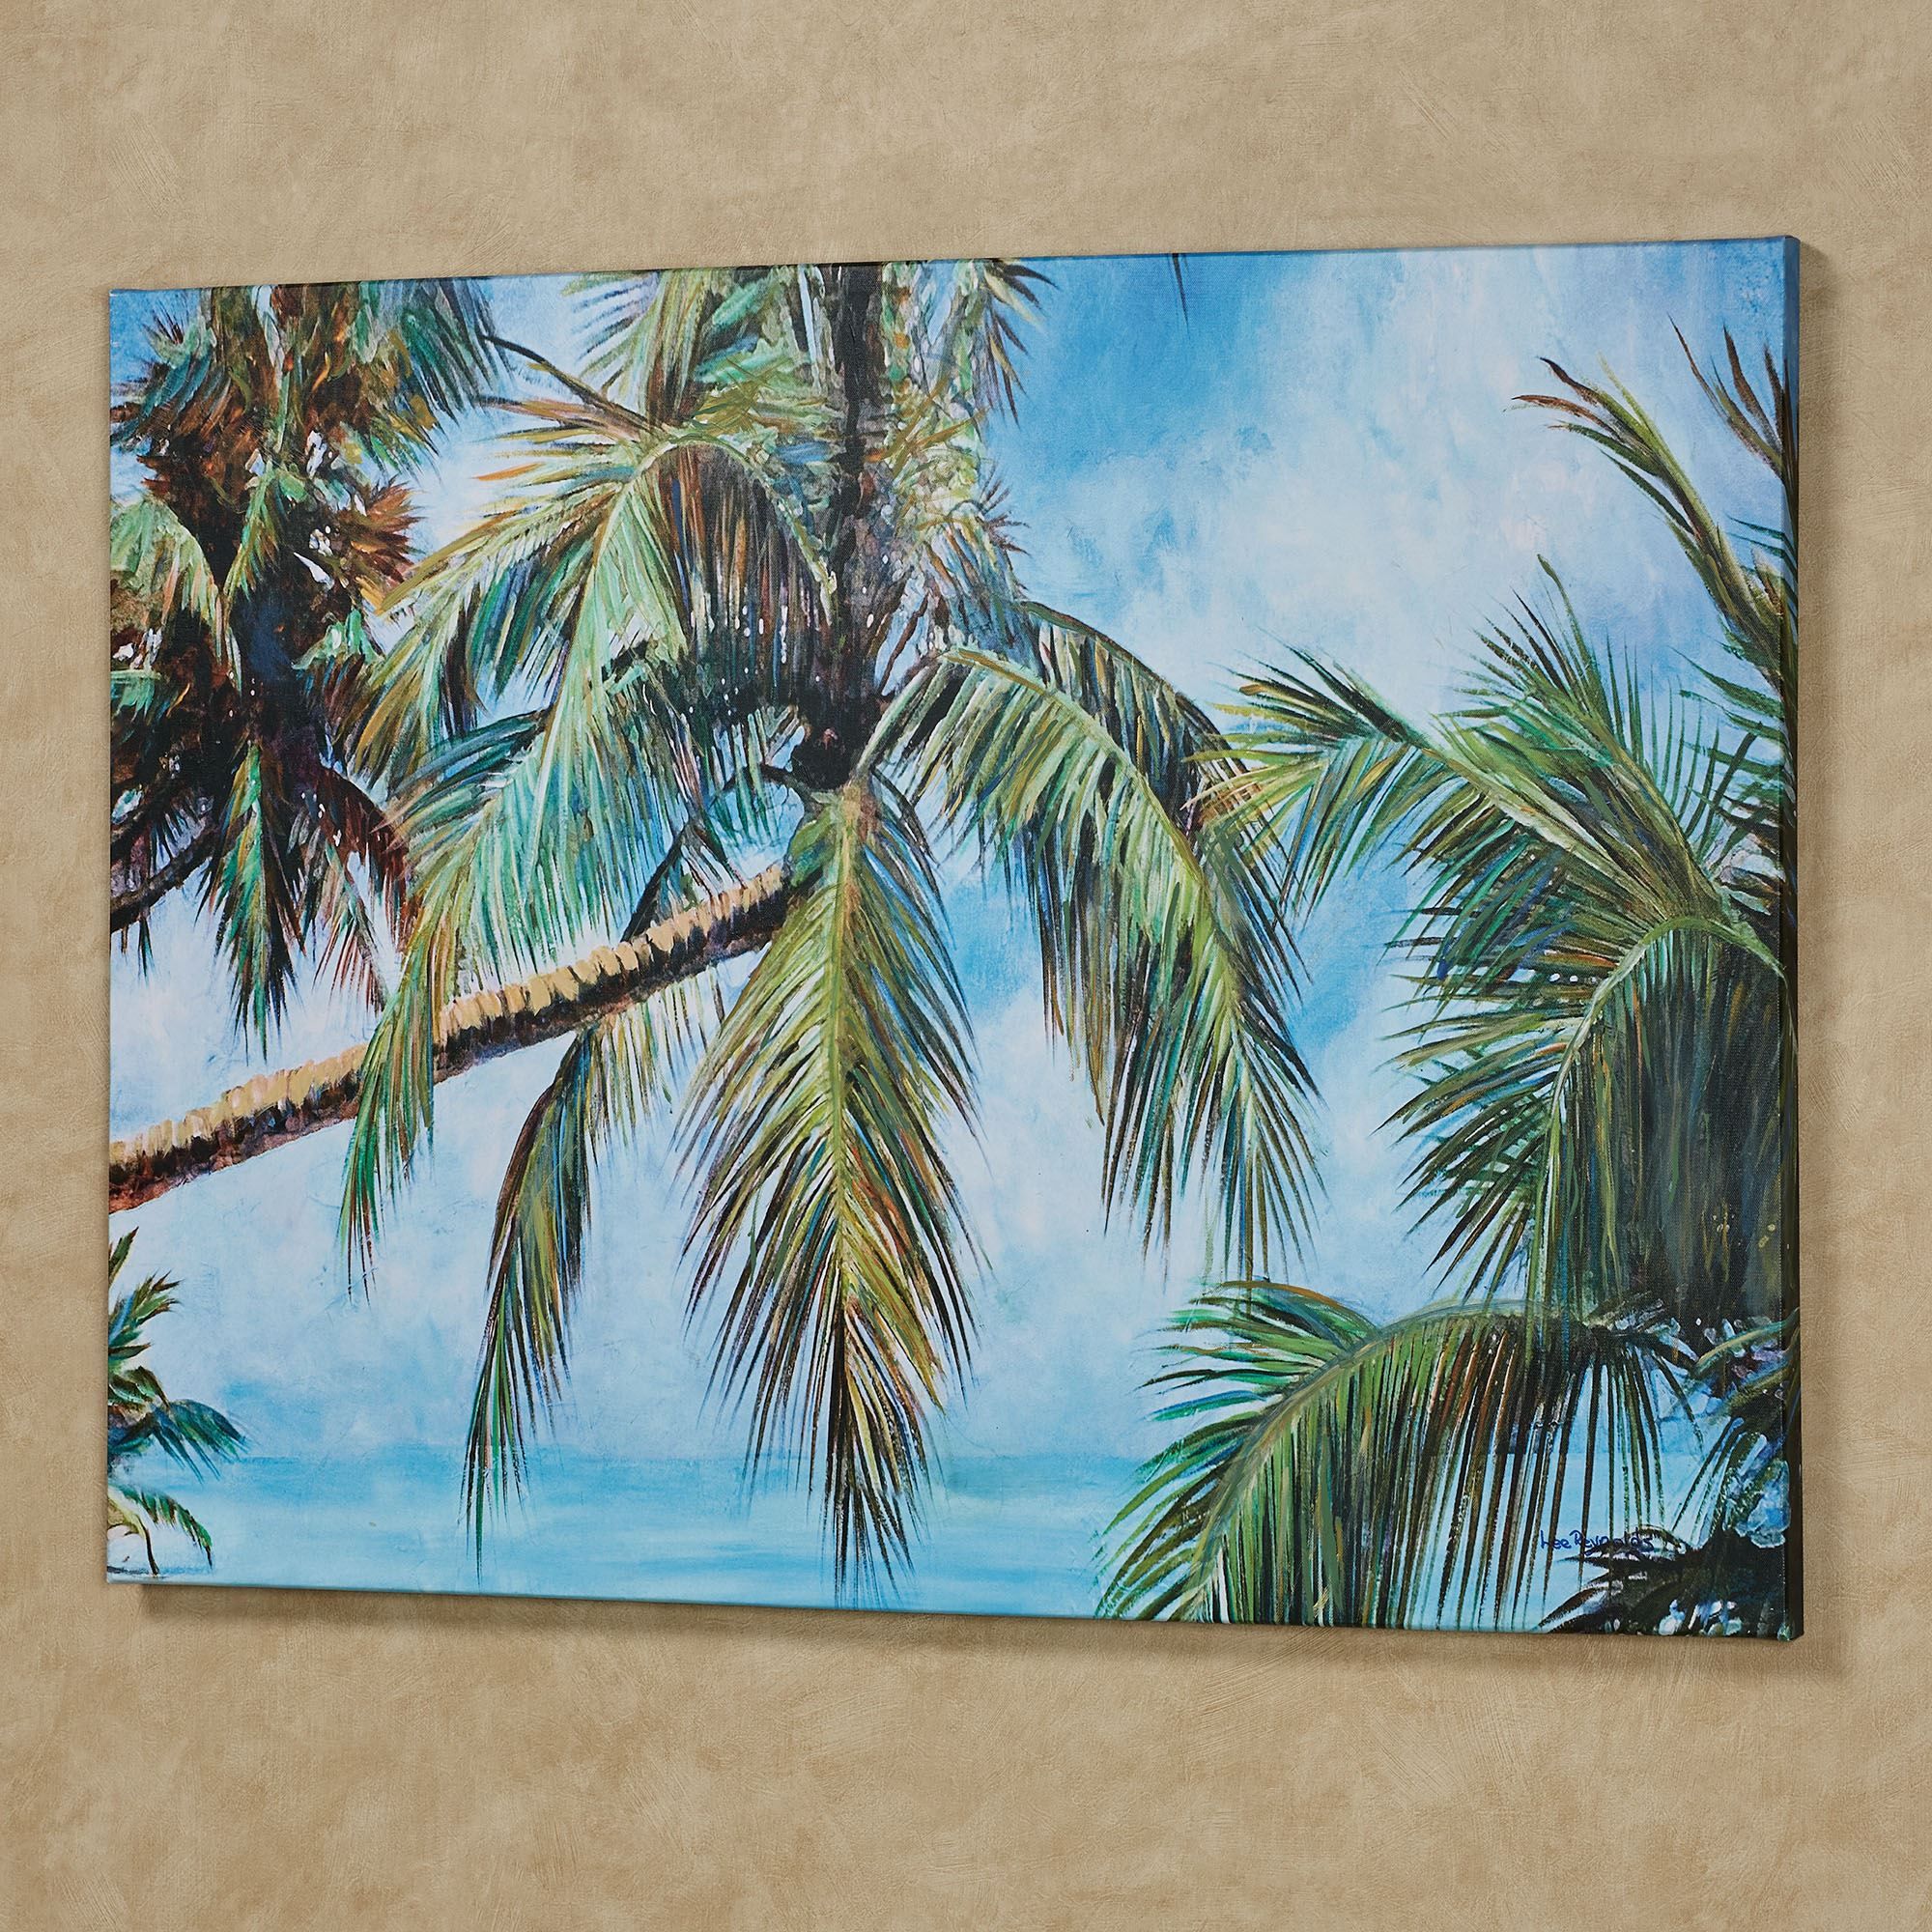 Leaning Palm Trees Tropical Canvas Wall Art Inside Newest Desert Palms Wall Art (View 7 of 20)